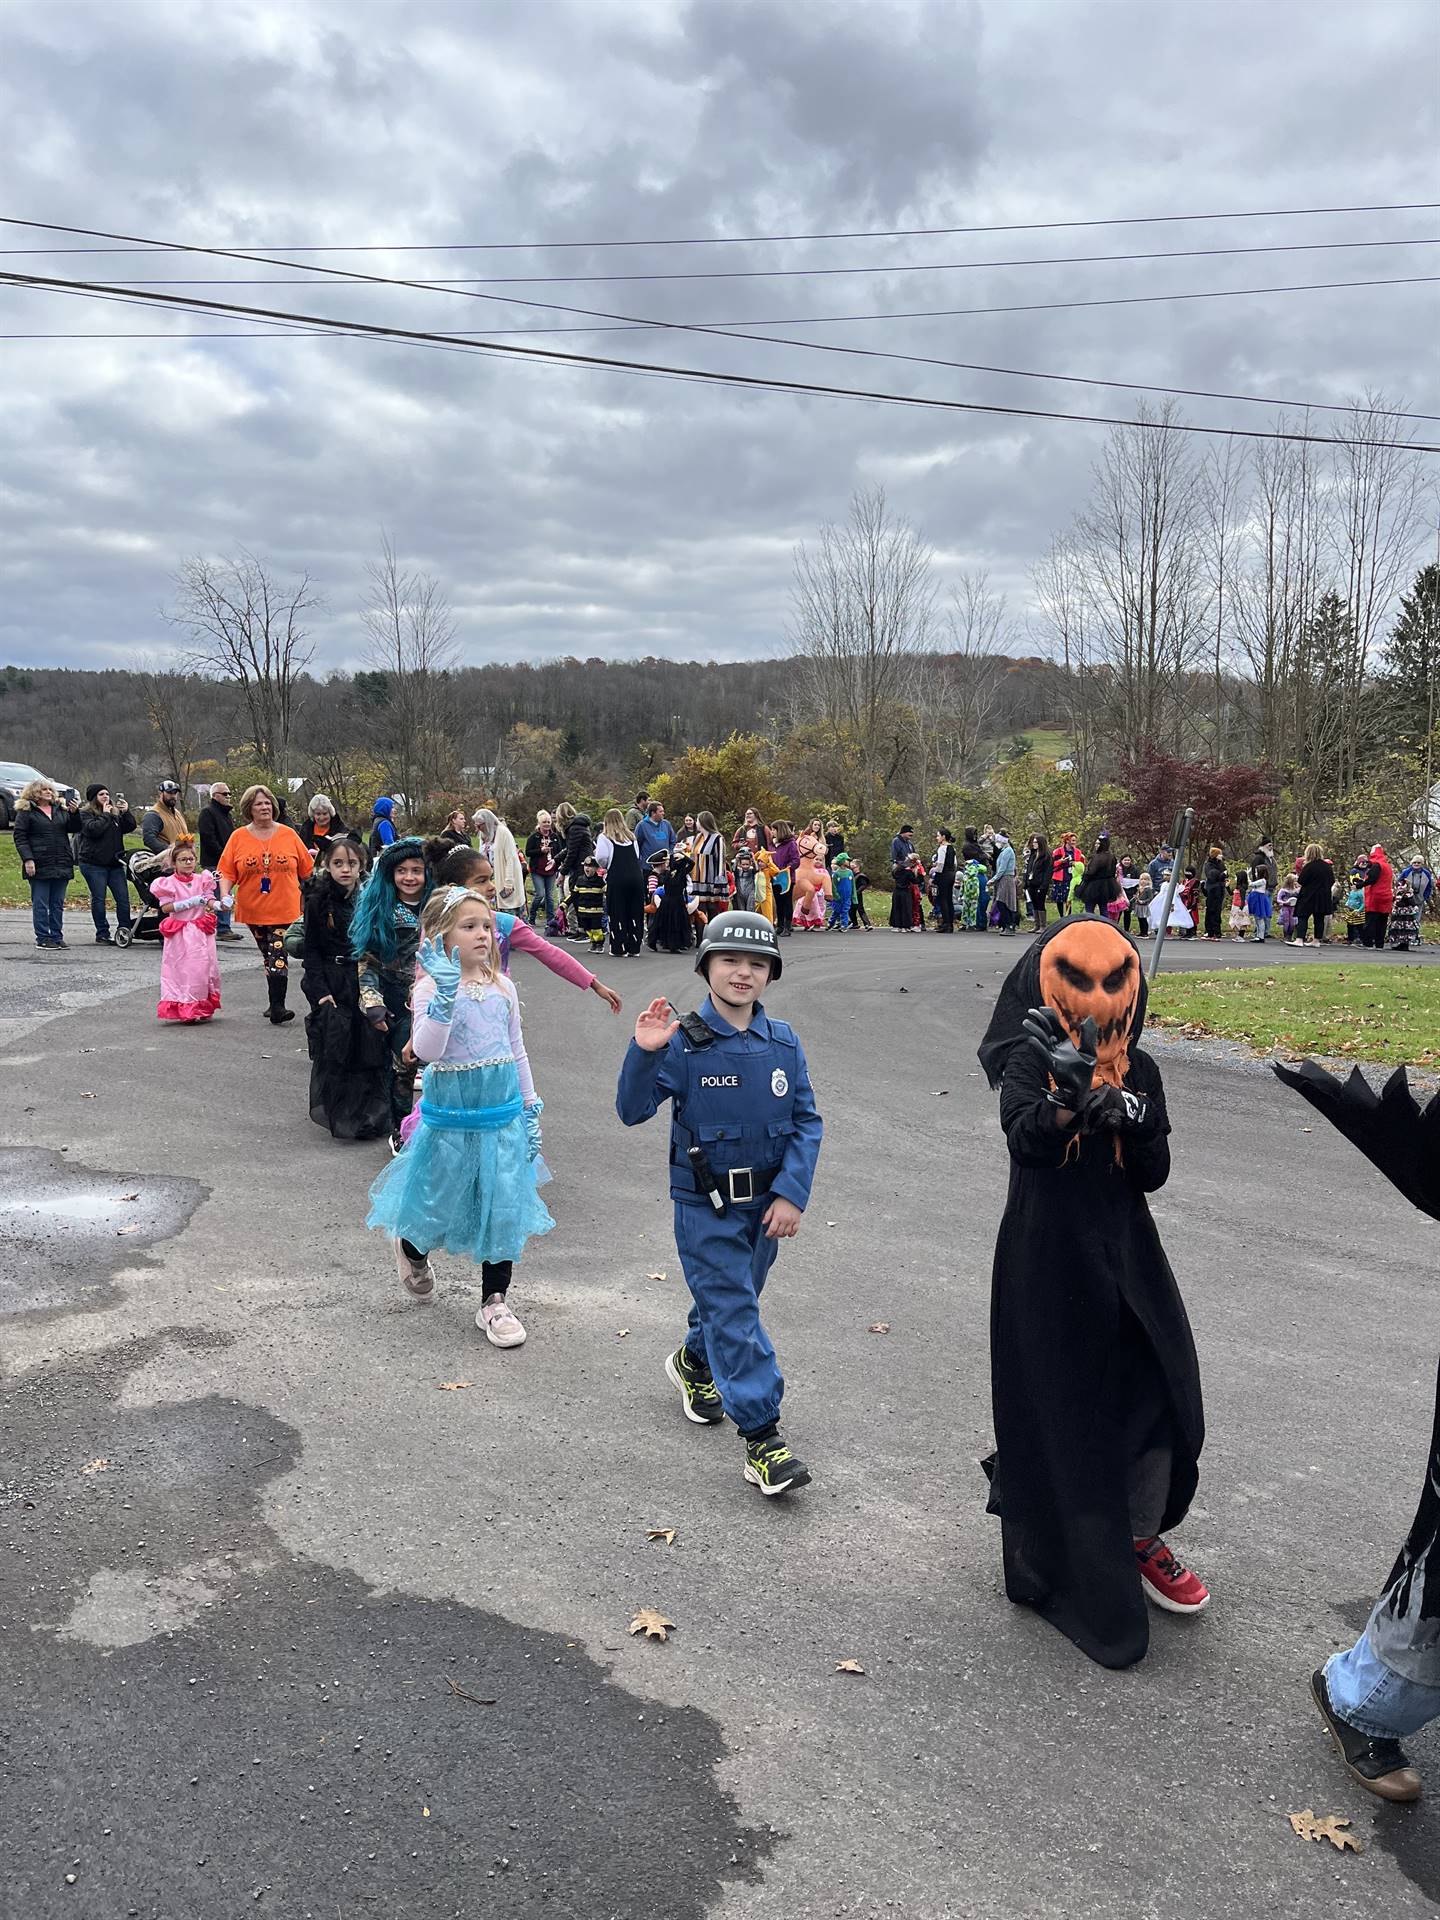 group of students dressed up for Halloween and parading.